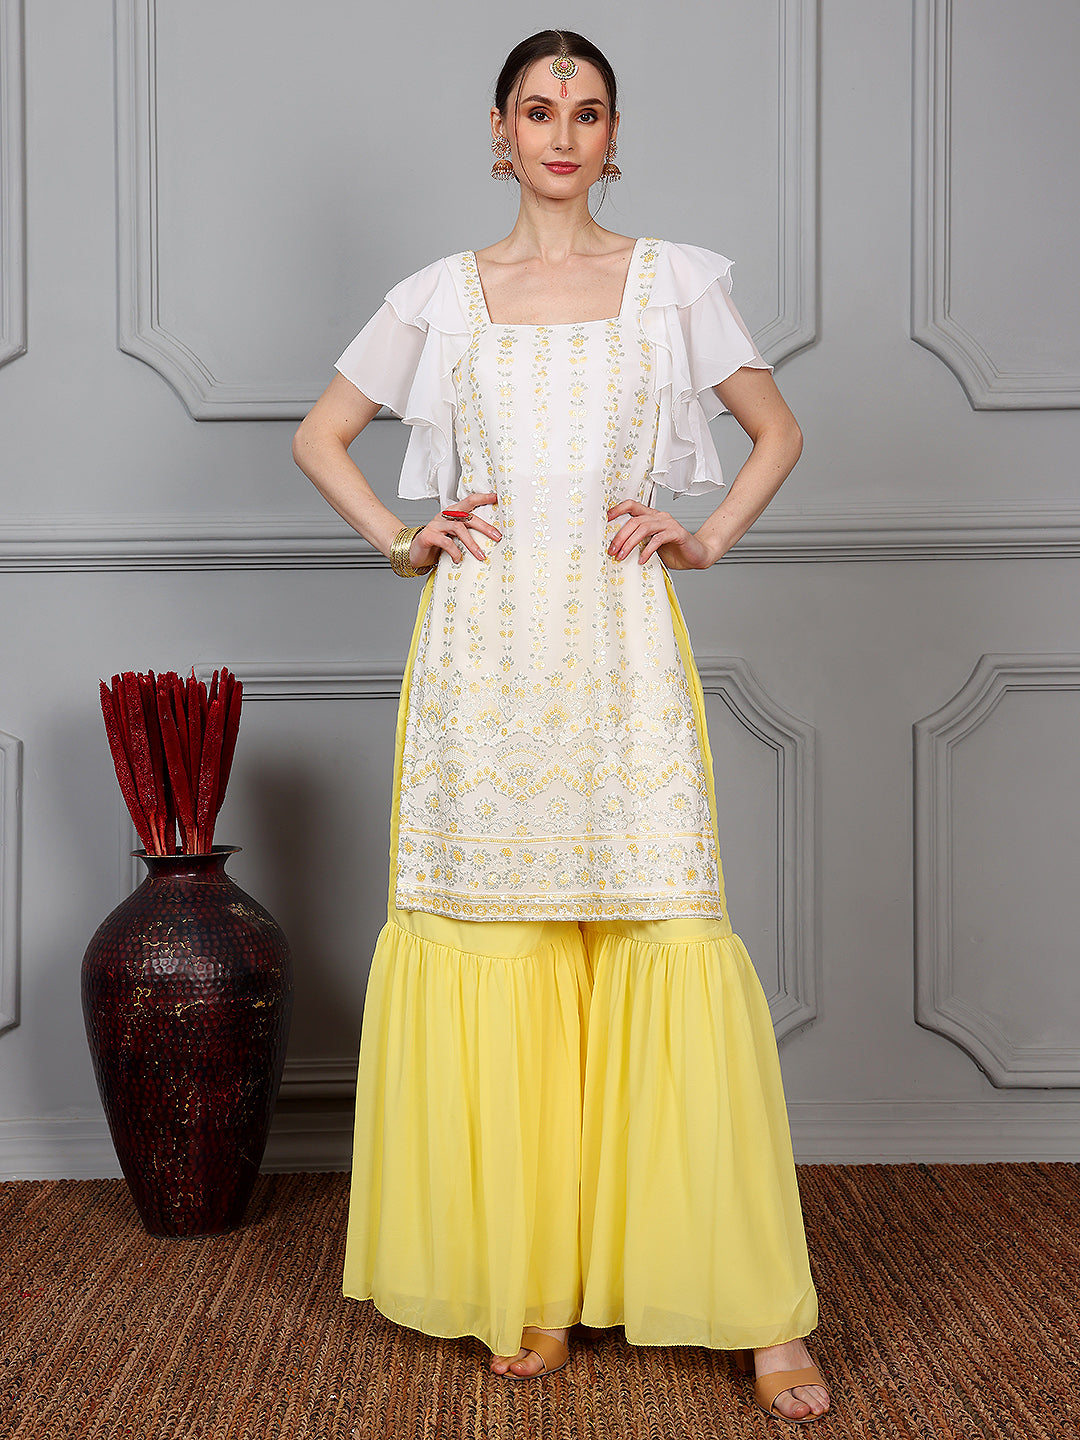 White & Yellow Georgette Embroidered Gharara Suit